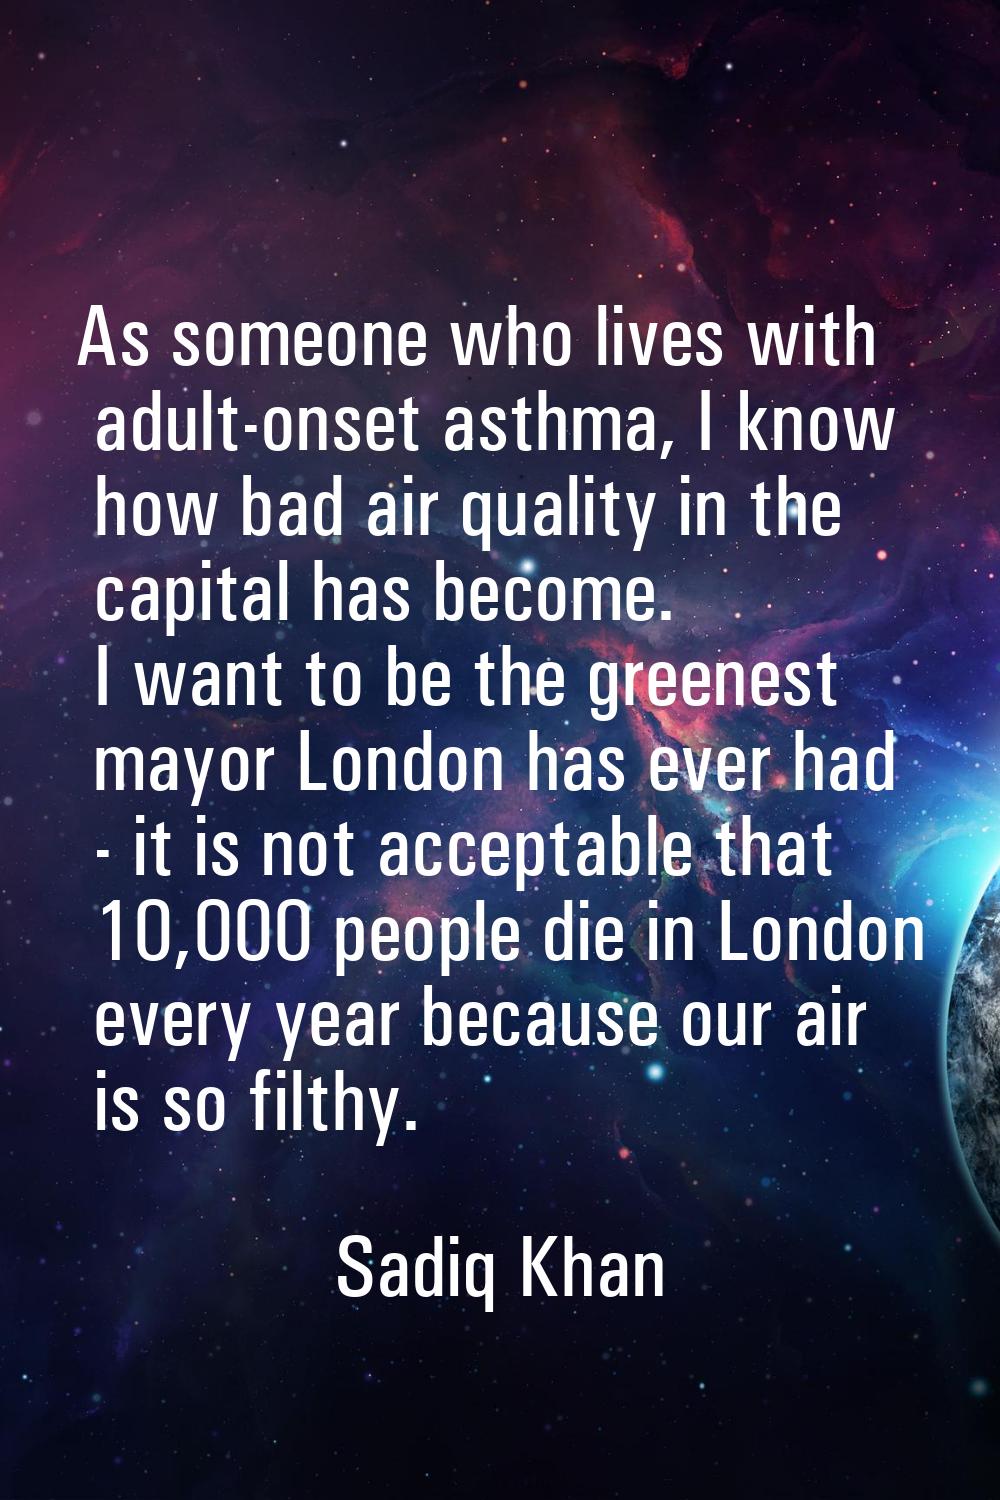 As someone who lives with adult-onset asthma, I know how bad air quality in the capital has become.